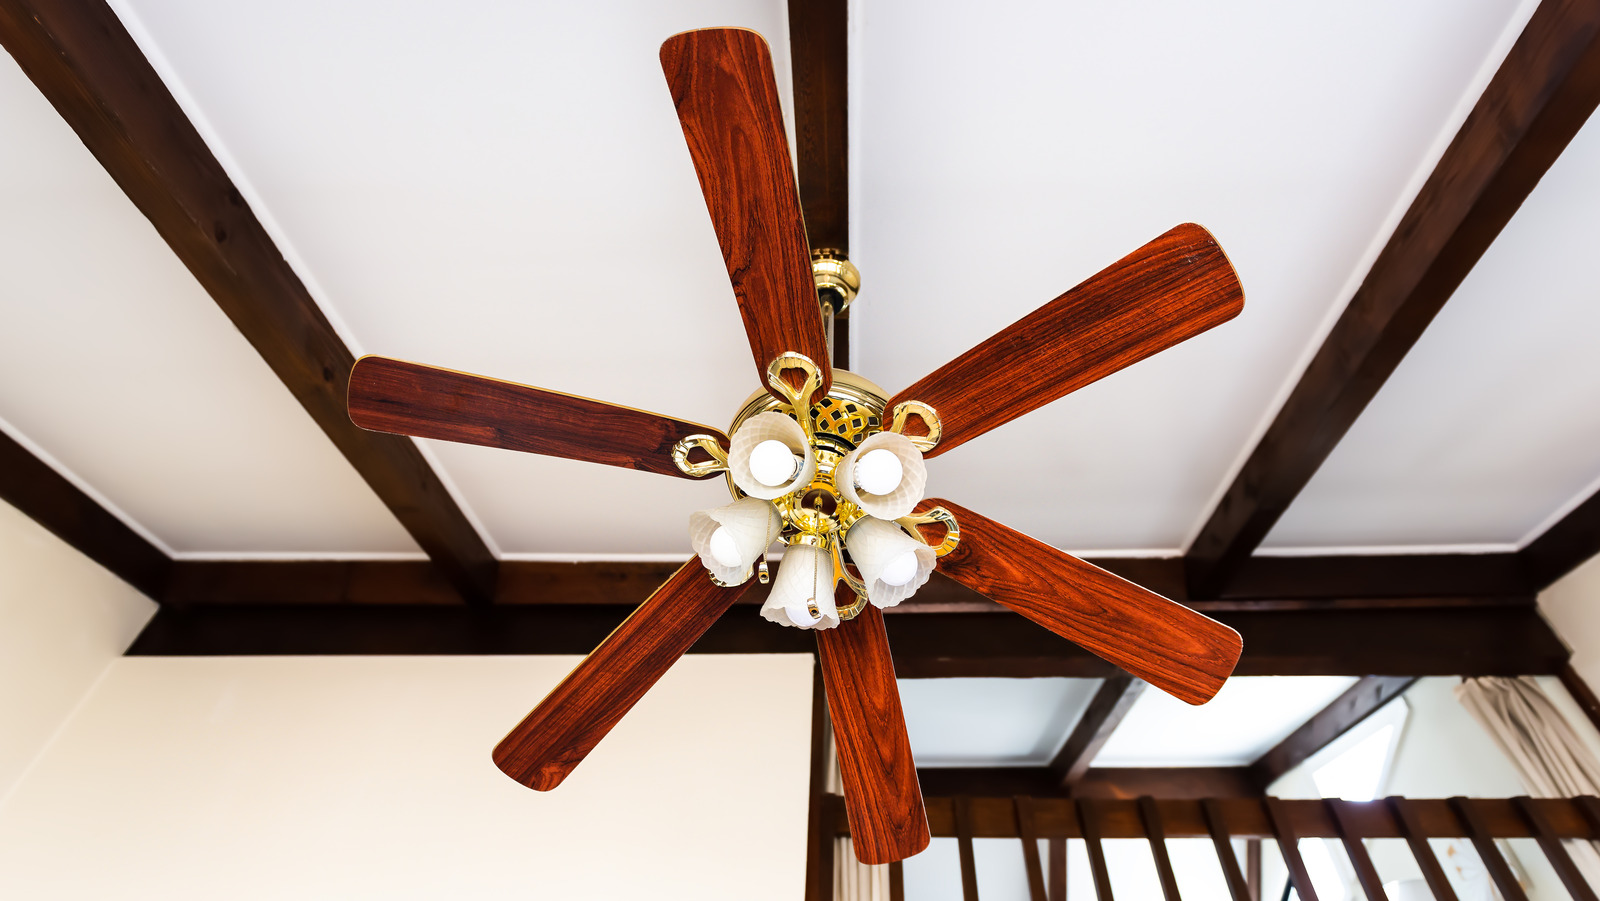 The Best Way To Paint An Old Ceiling Fan Give It A Trendy Facelift